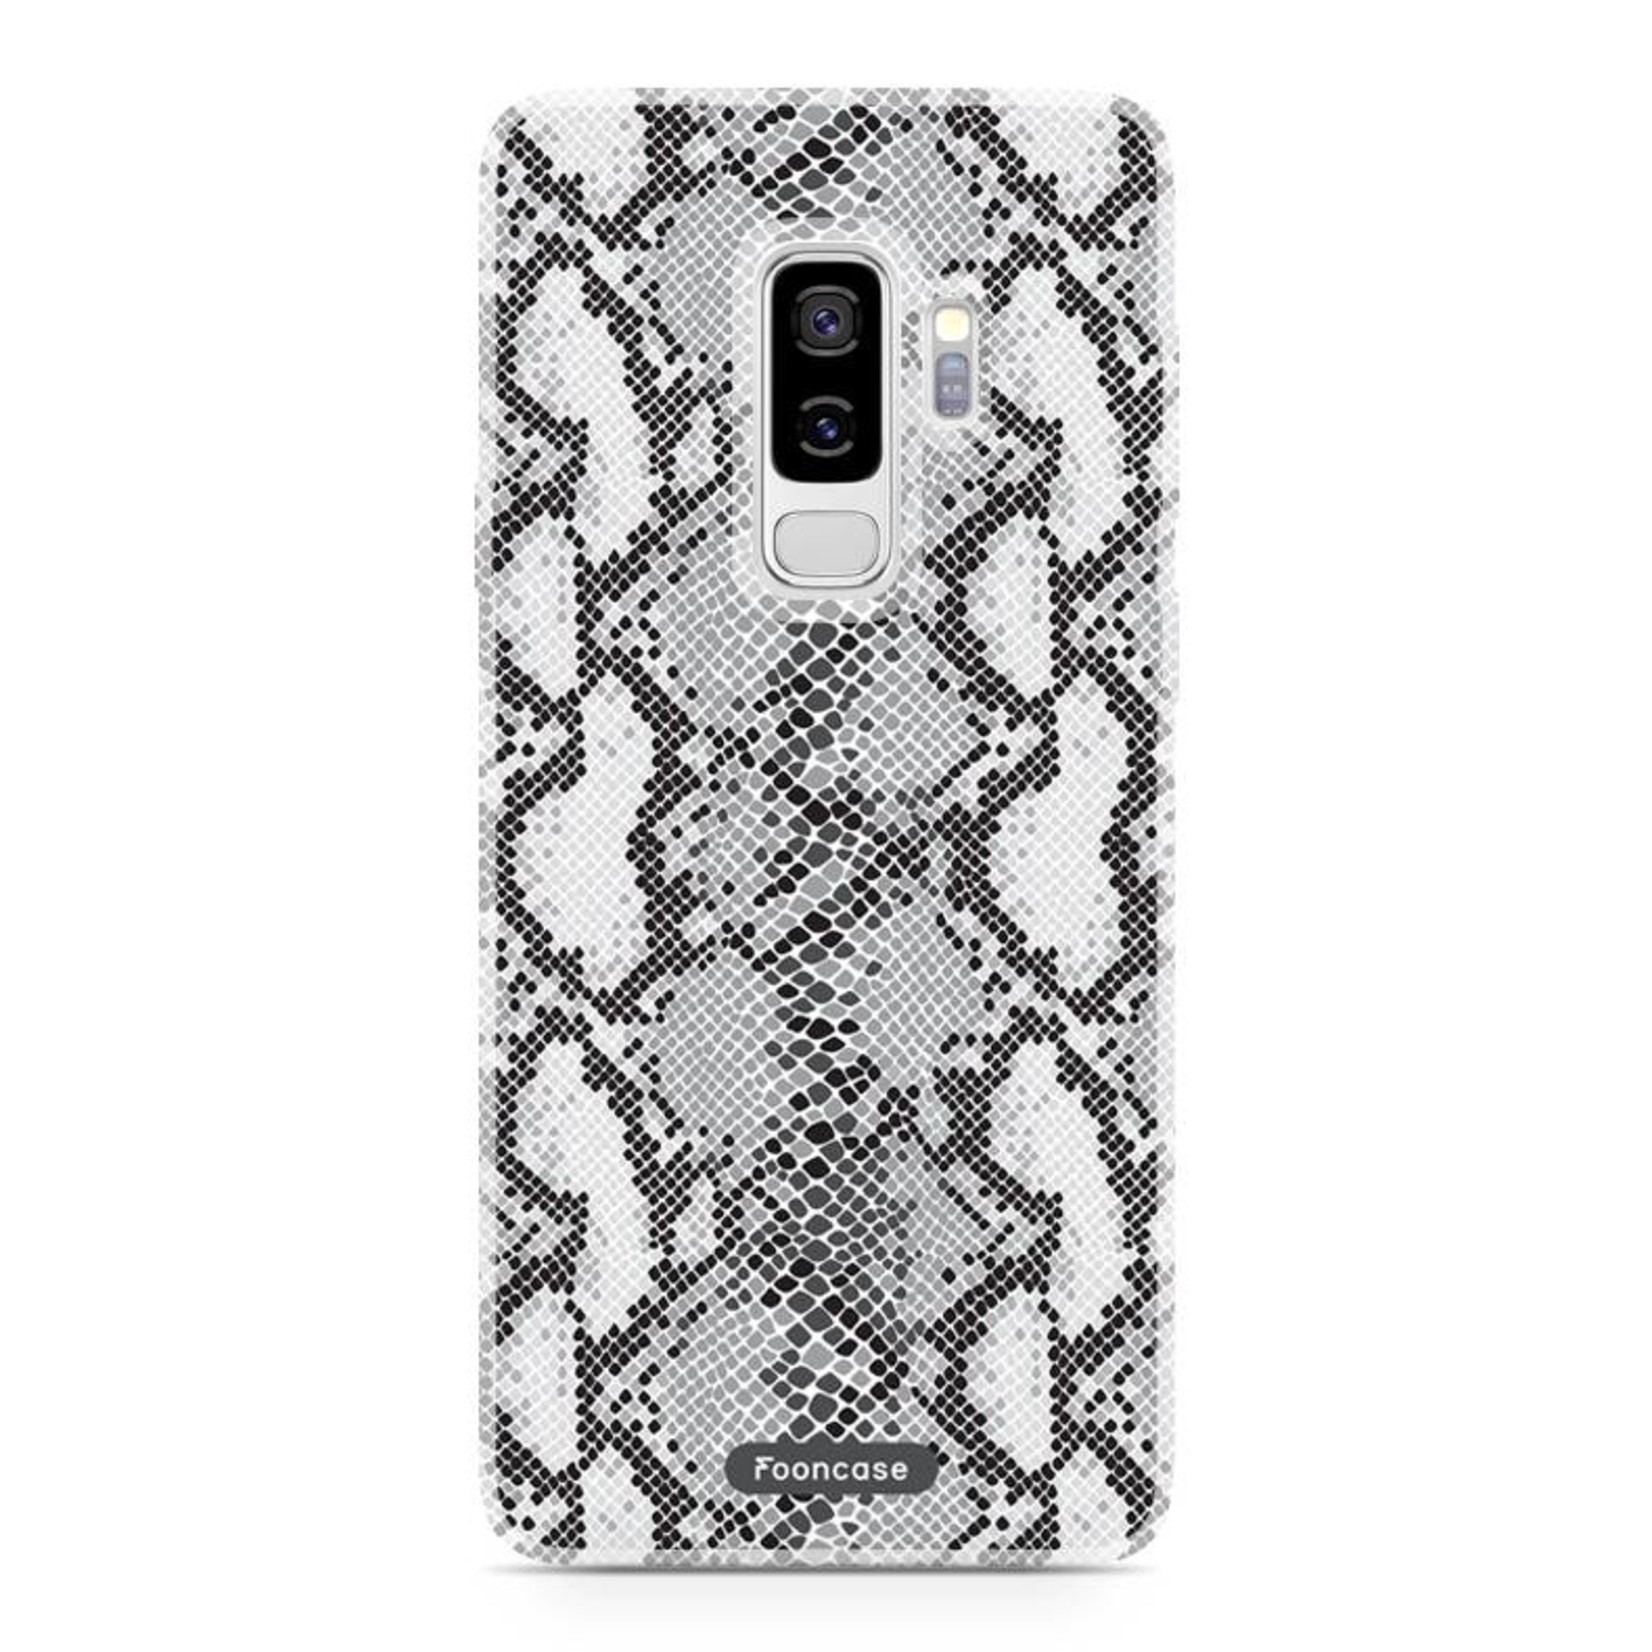 FOONCASE Samsung Galaxy S9 Plus Cover - Snake it!